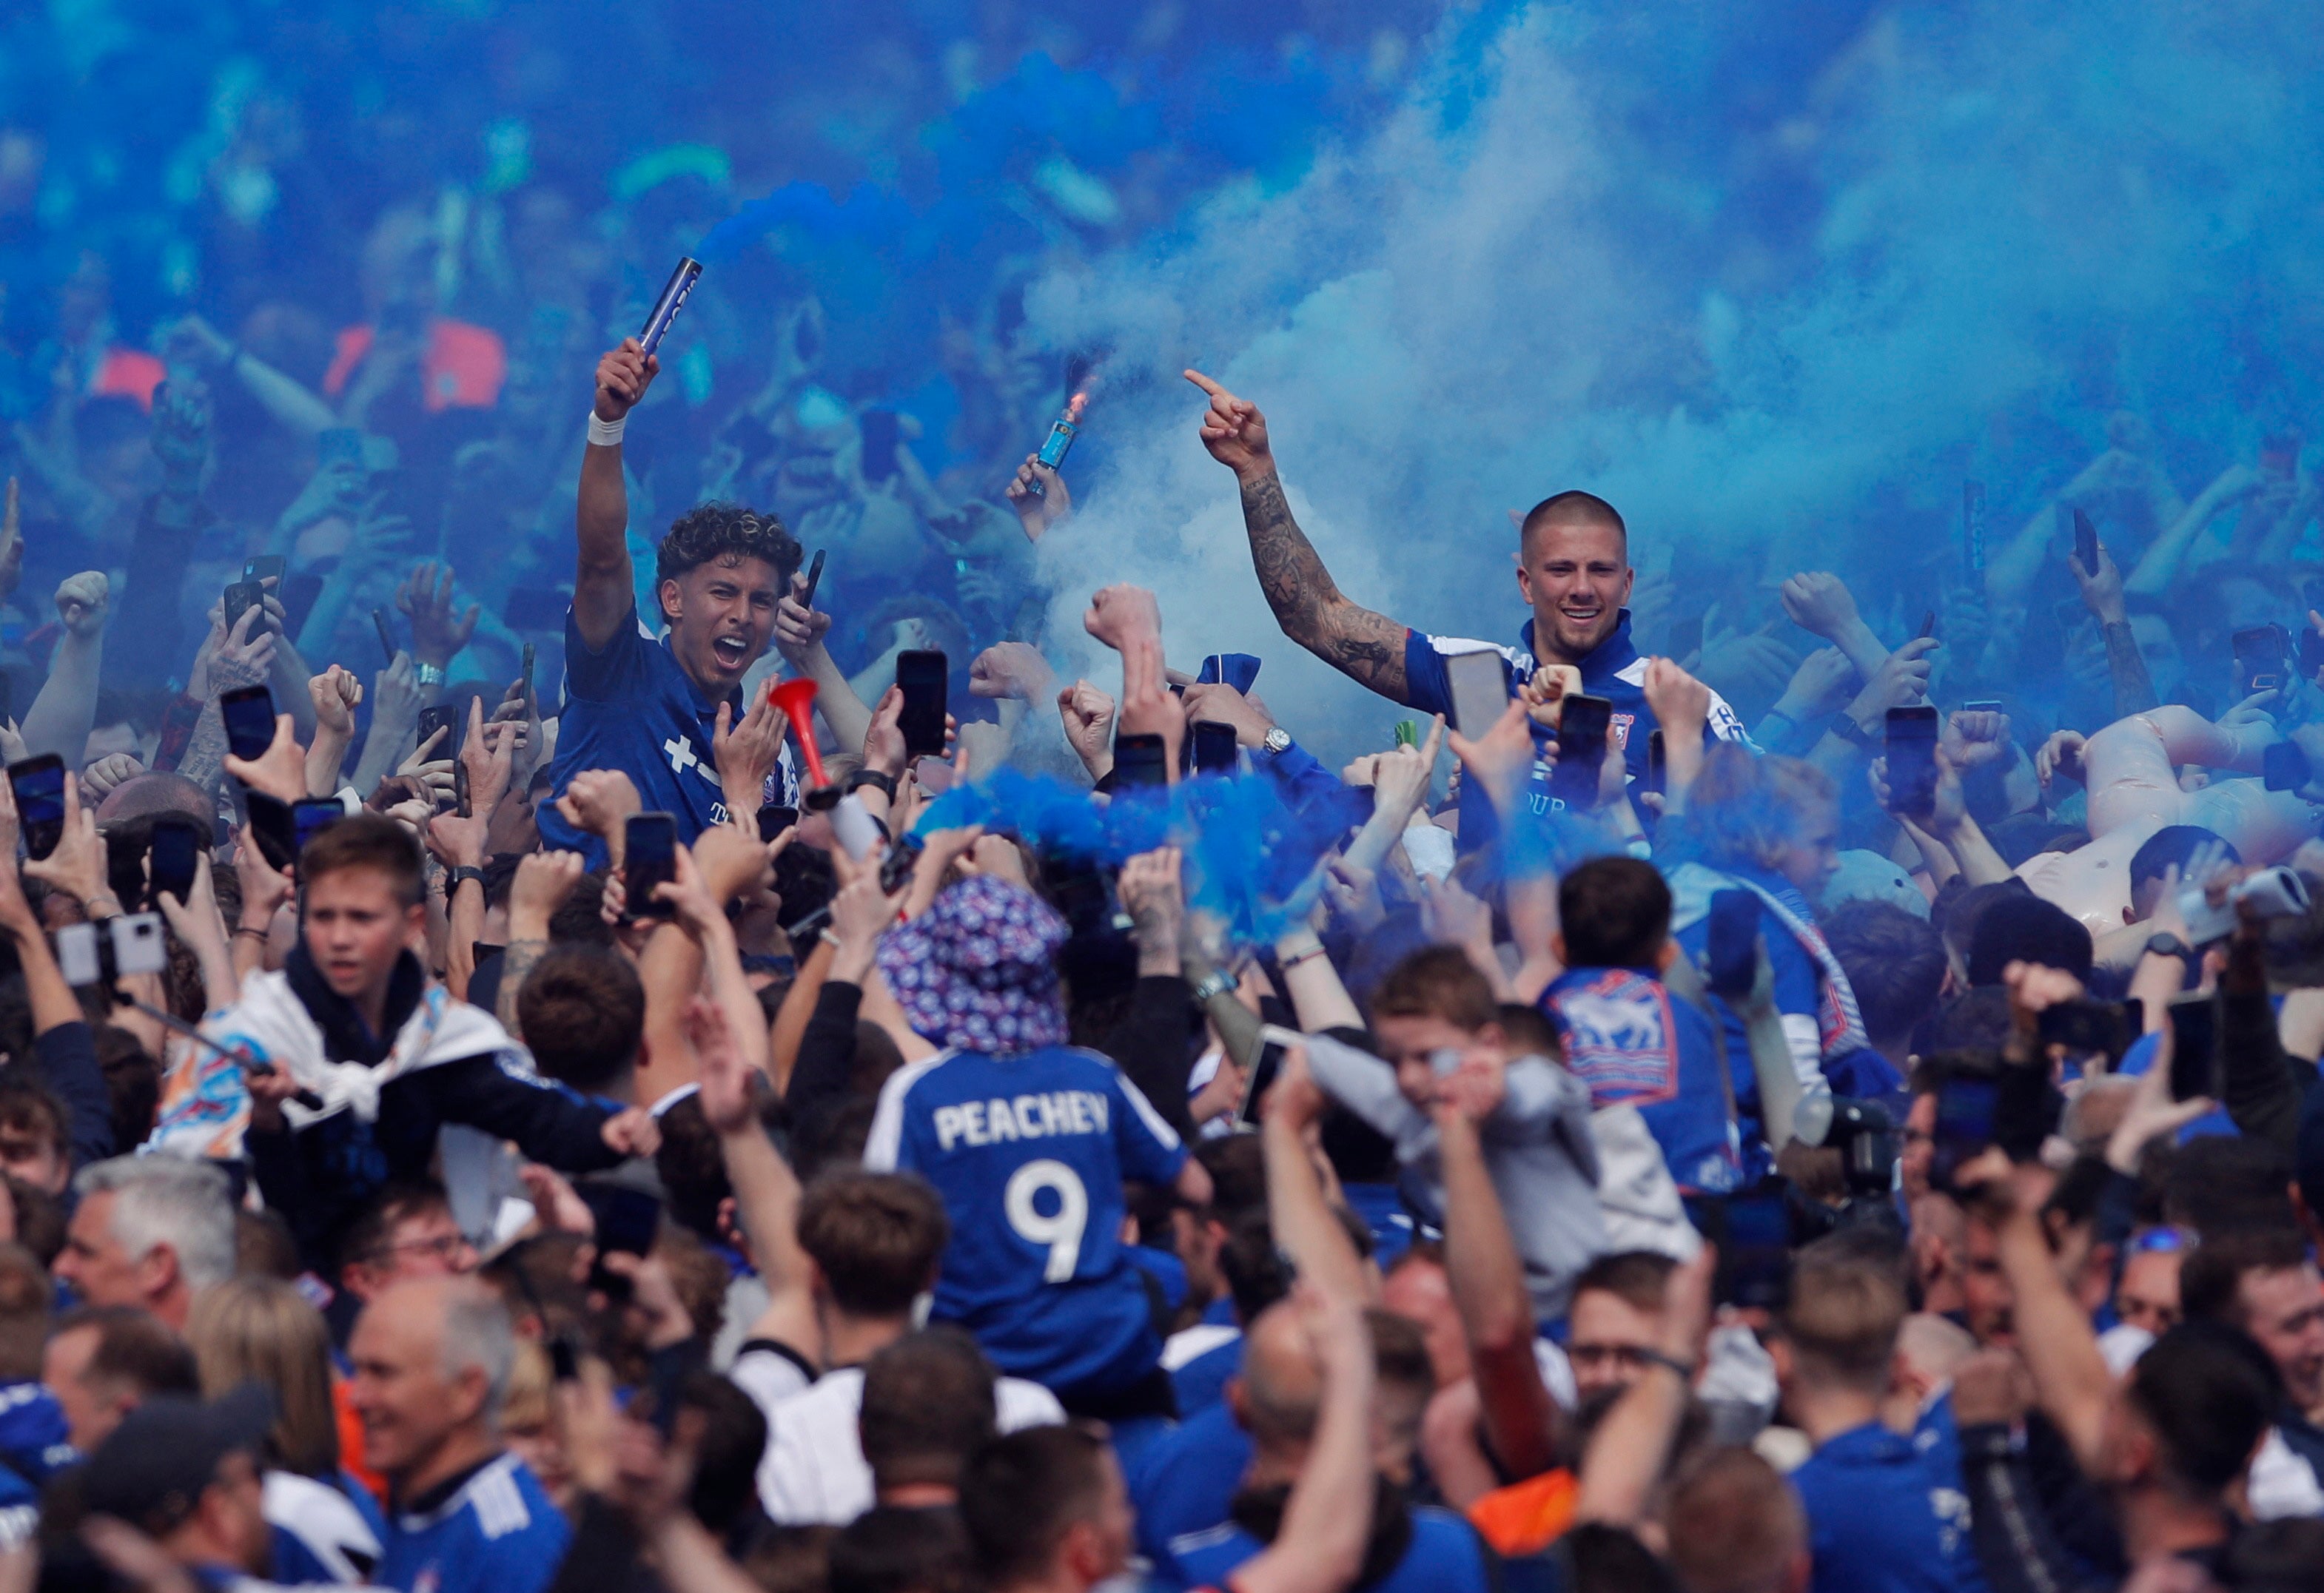 ipswich complete remarkable rise to seal premier league promotion after 22 years away